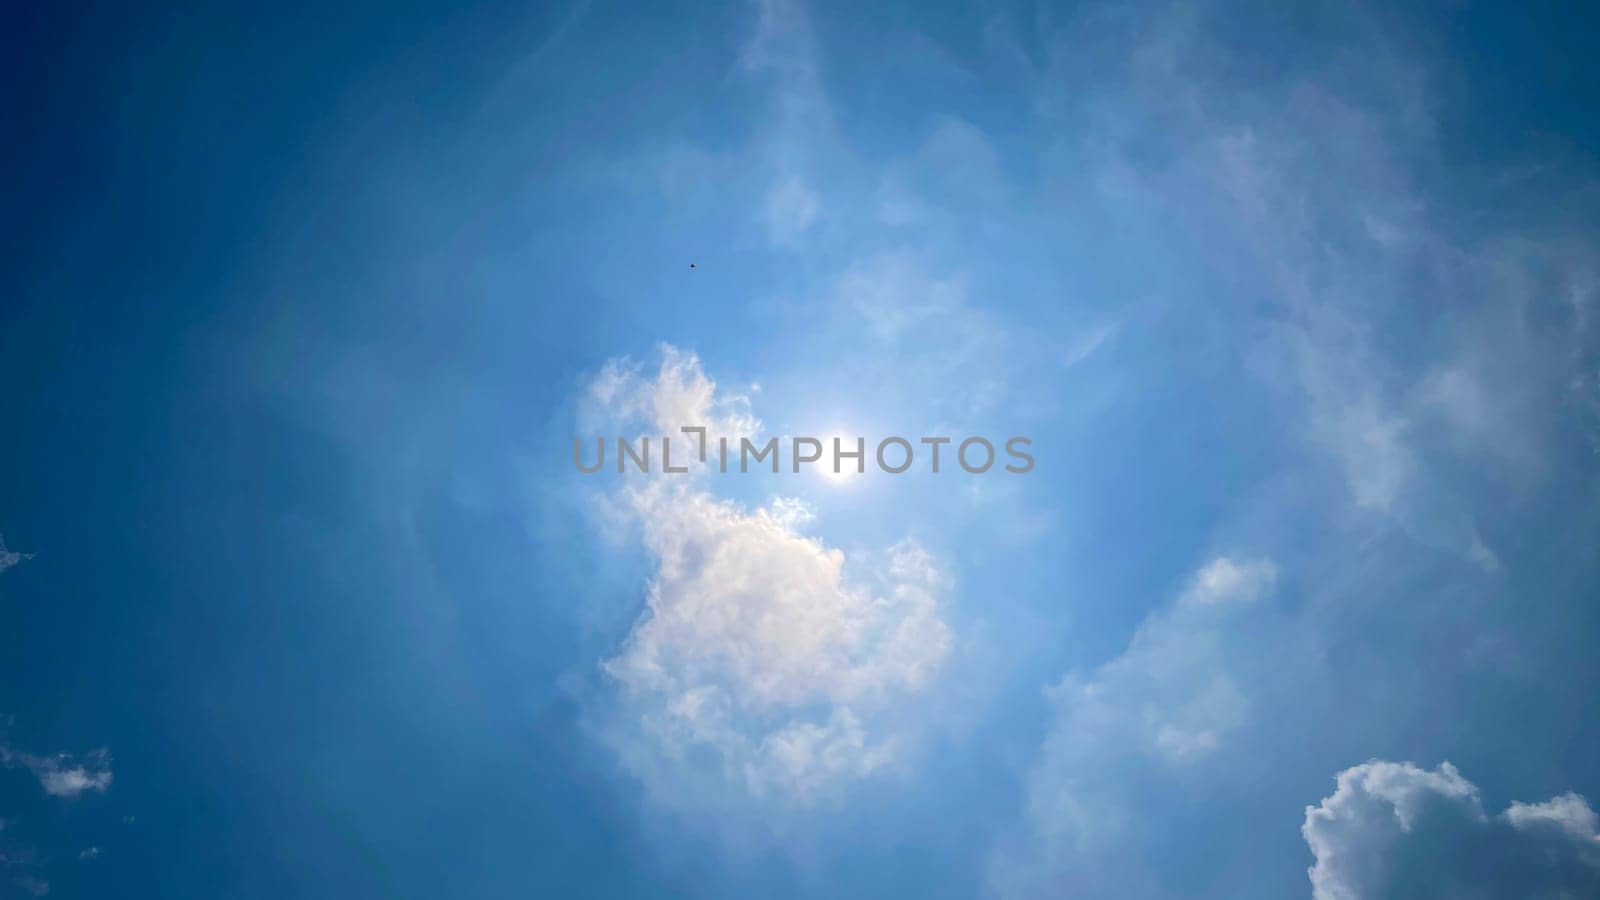 Heavenly white clouds on the blue sky with the sun appeared perfect for multimedia texture or background